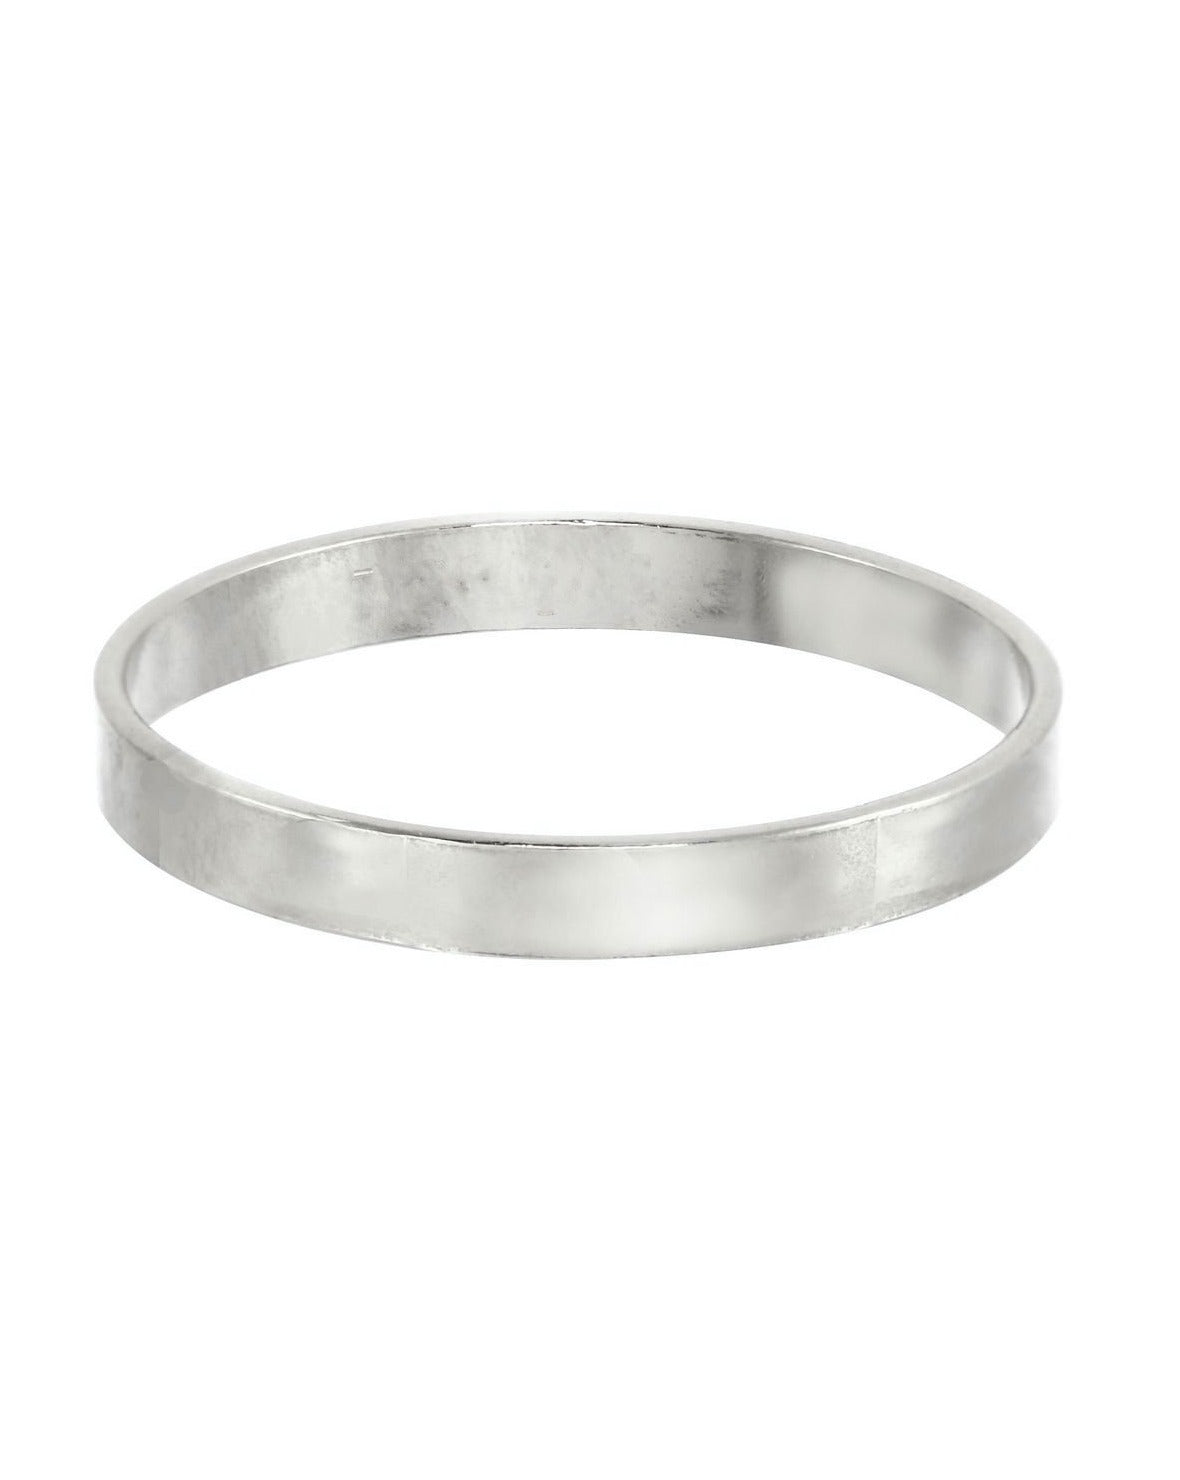 Thin Ring by KOZAKH. A 2mm flat ring, crafted in Sterling Silver.